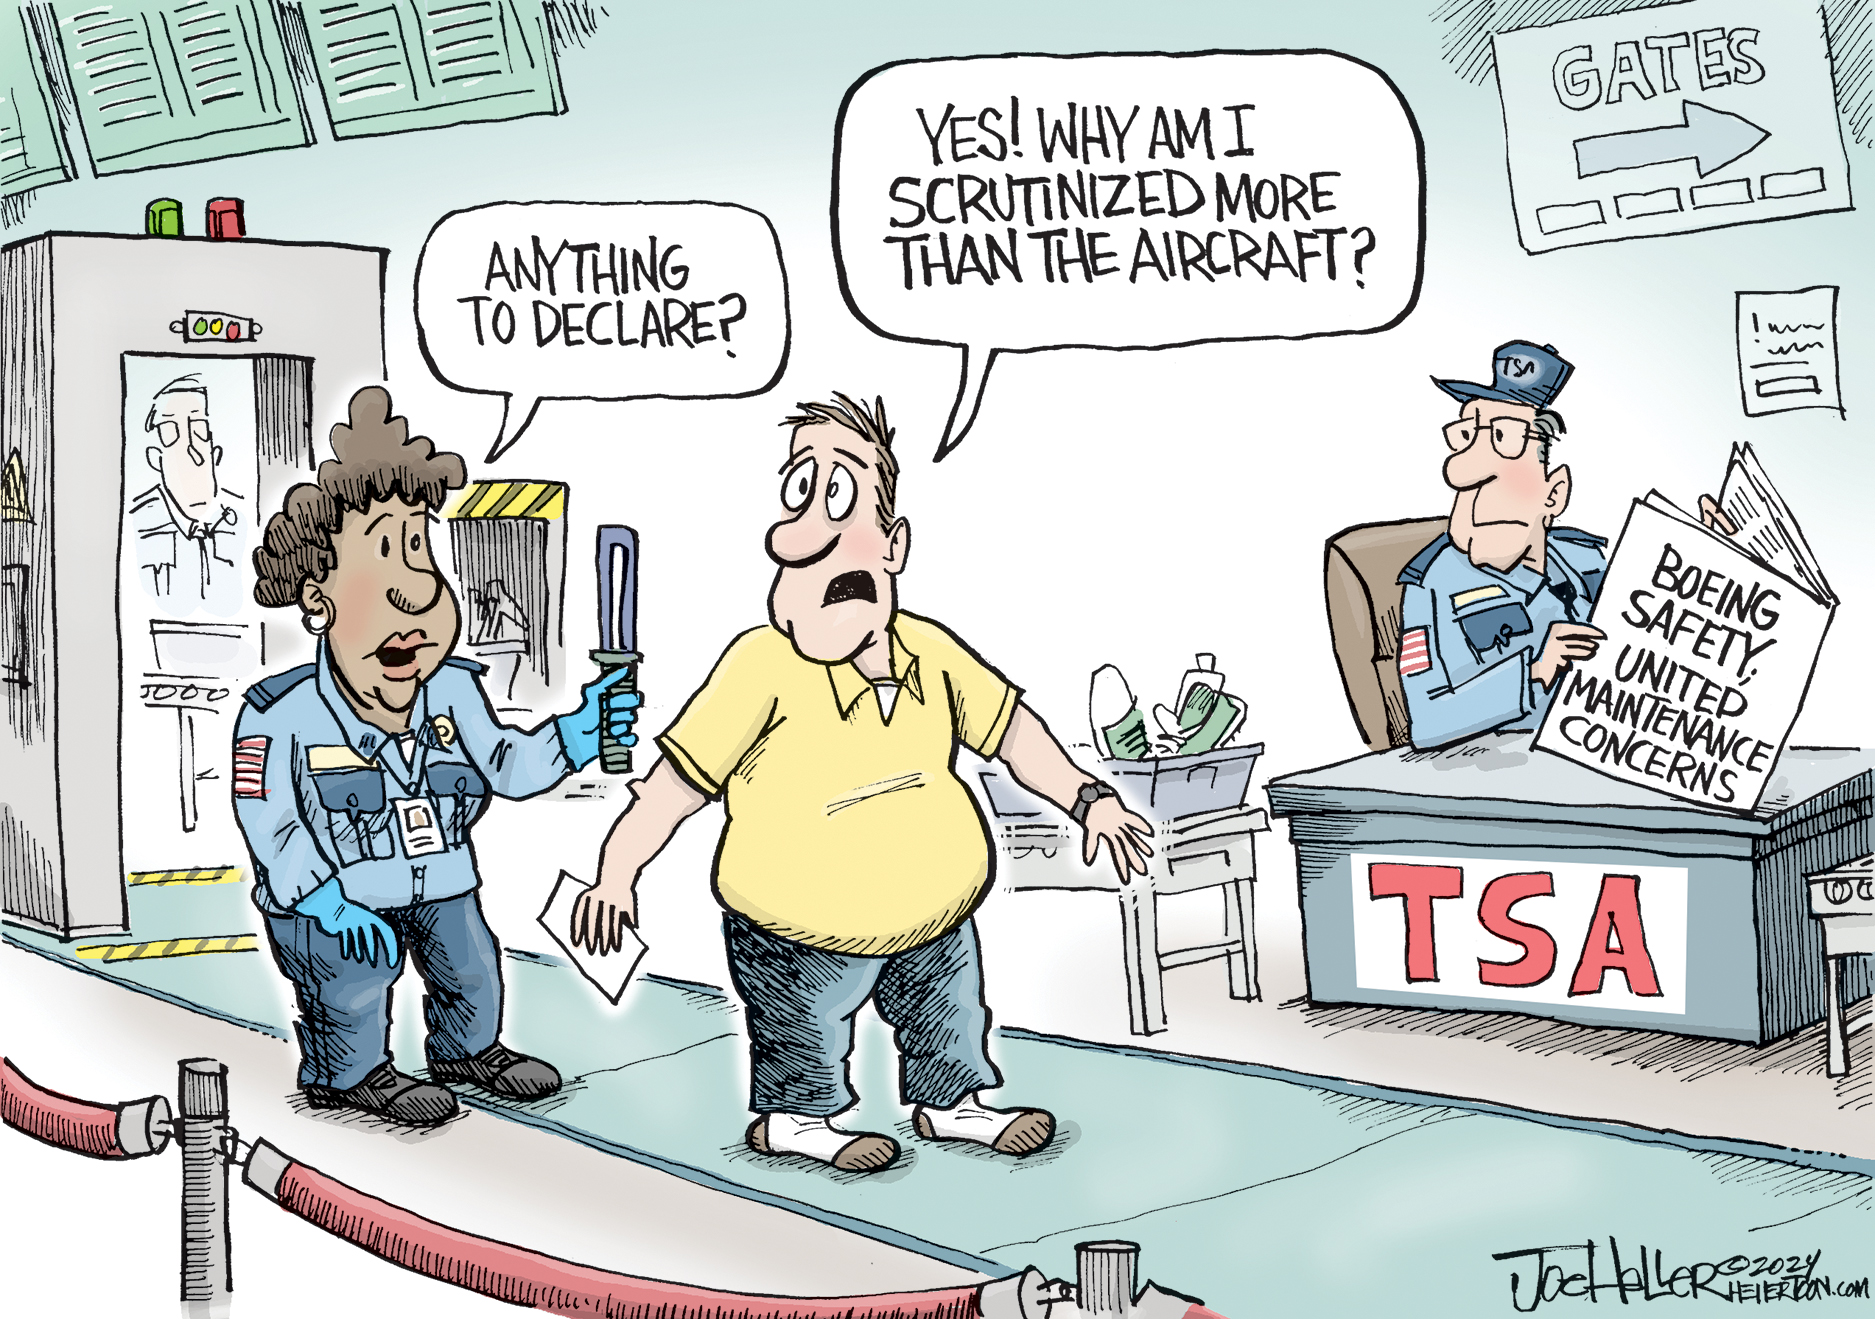 5 High-Flying Cartoons About Airplane Safety Issues